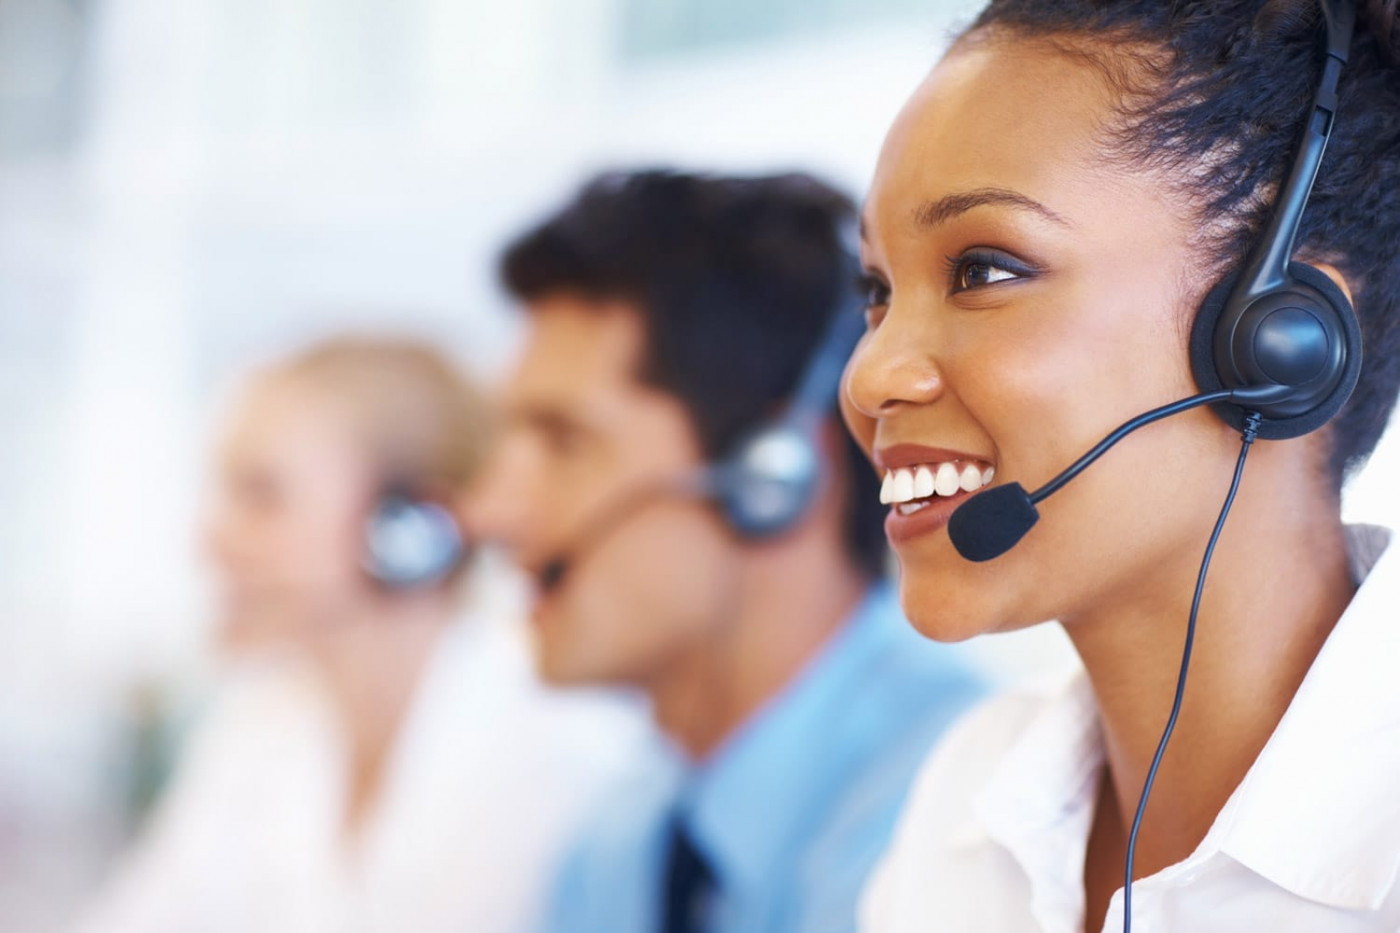 Colleagues Answering Service With Headset